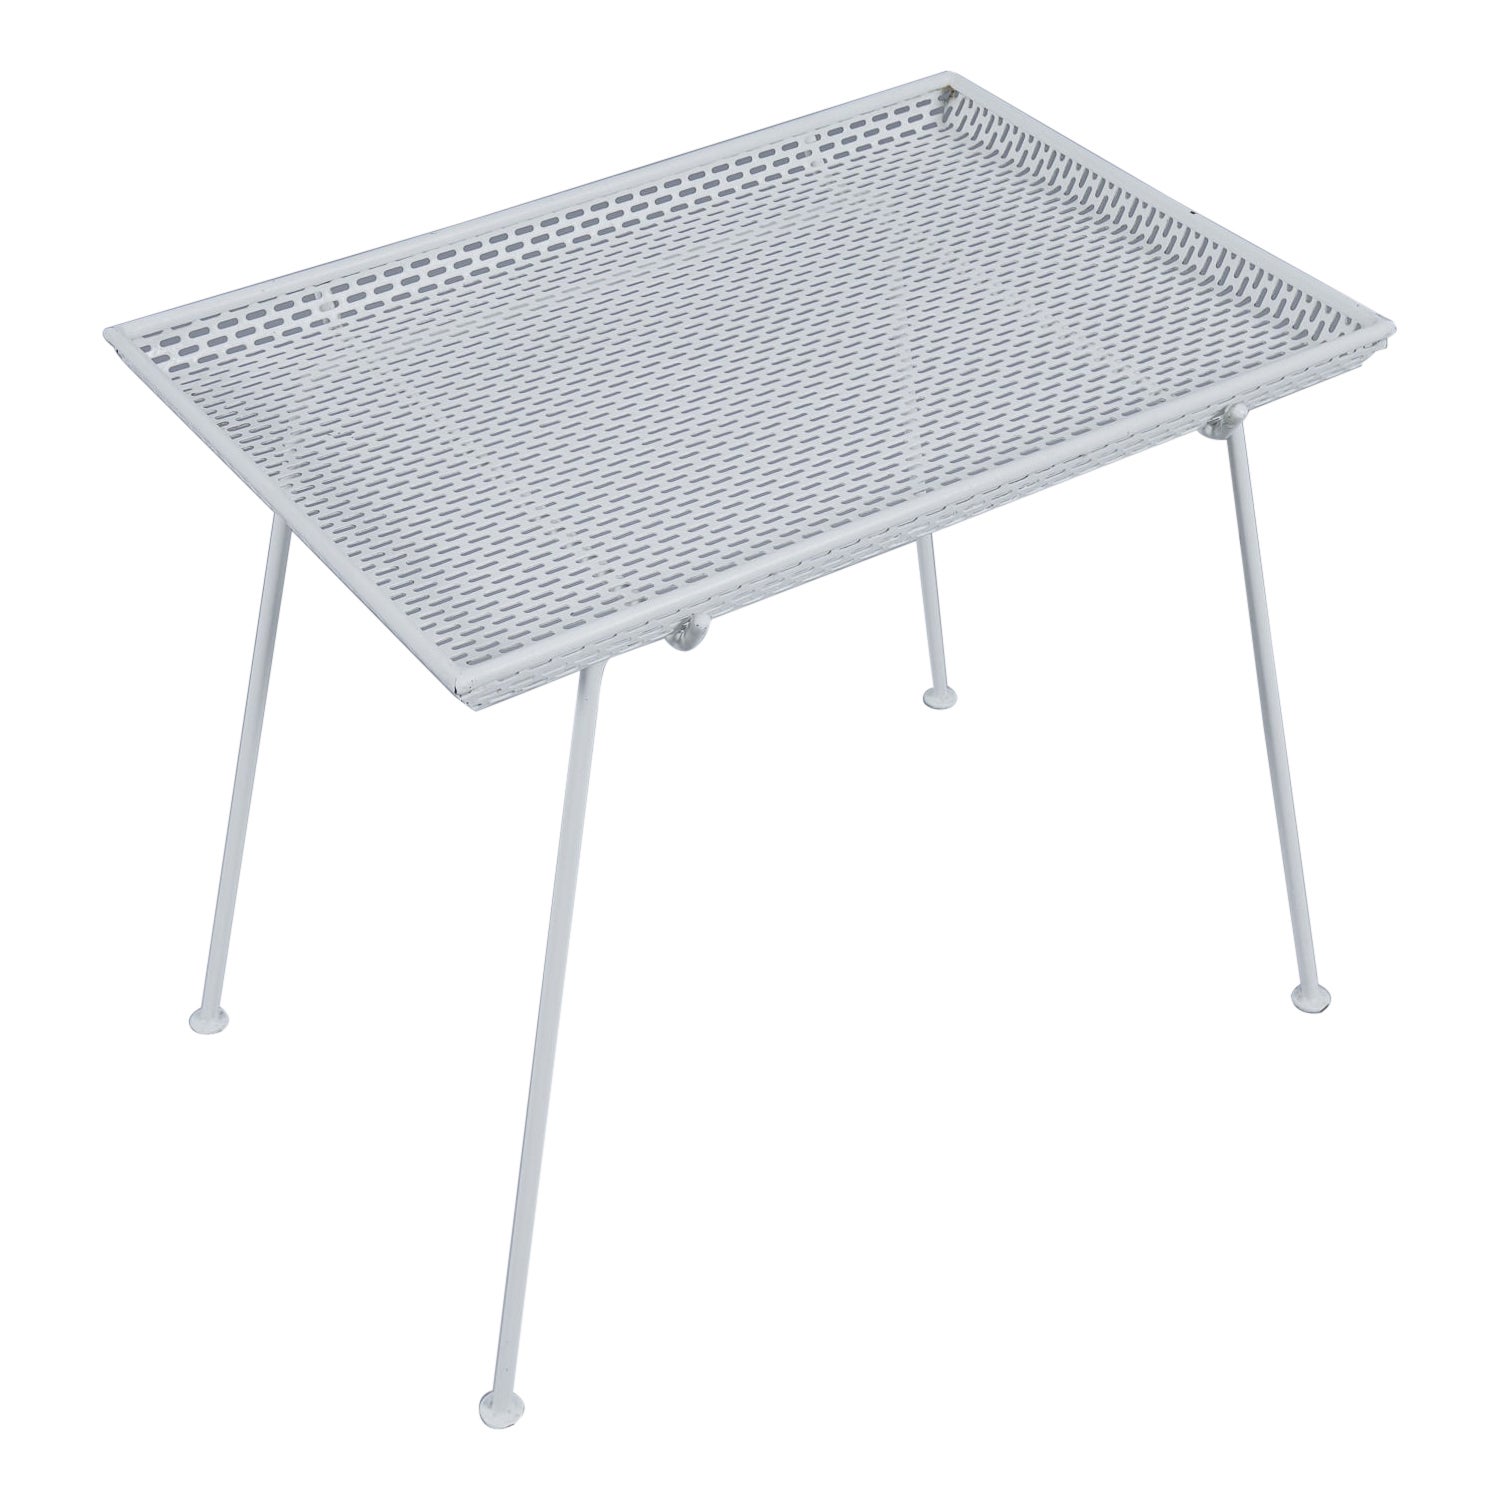 French Side Table in Perforated White Lacquered Metal With Removable Tray, 1950s